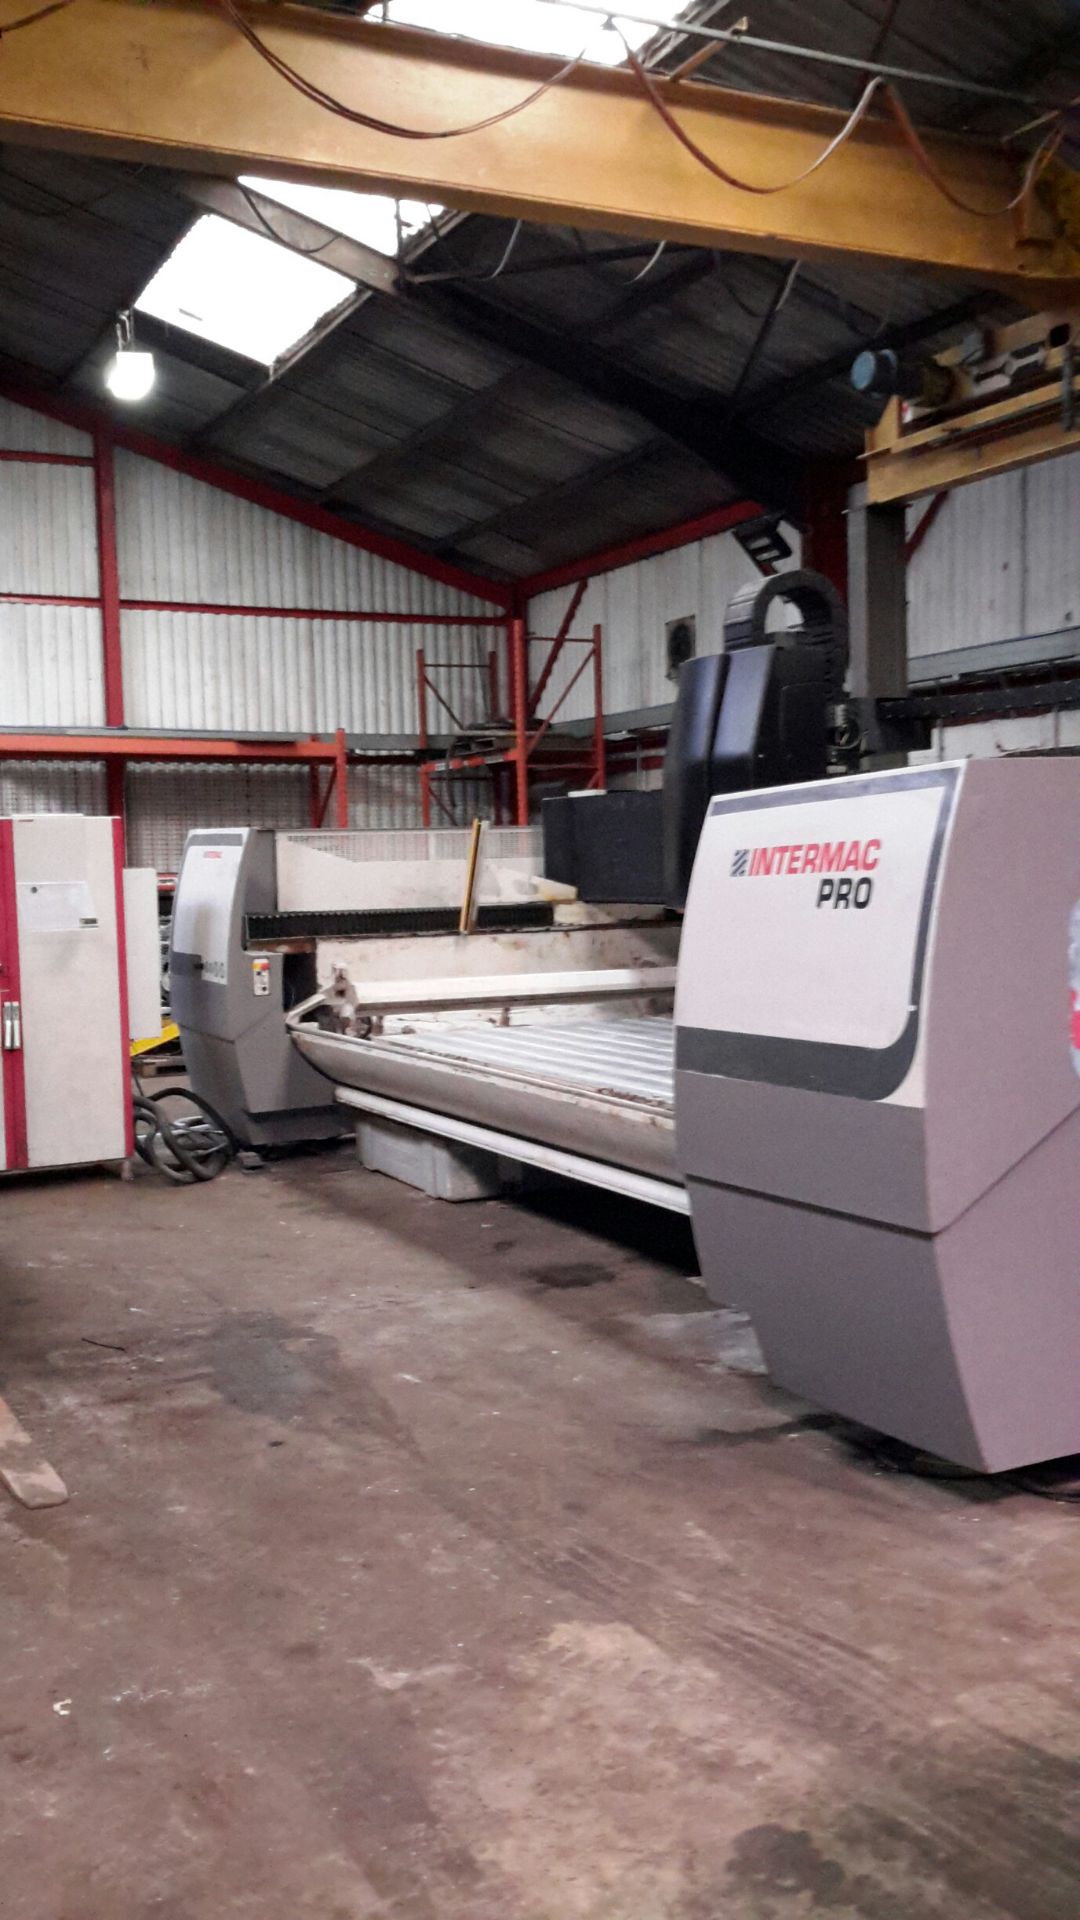 Intermac Pro C, CNC Machining Centre 4000×2000 Bed Size with S10 Numerical Control Unit, Serial - Image 5 of 5